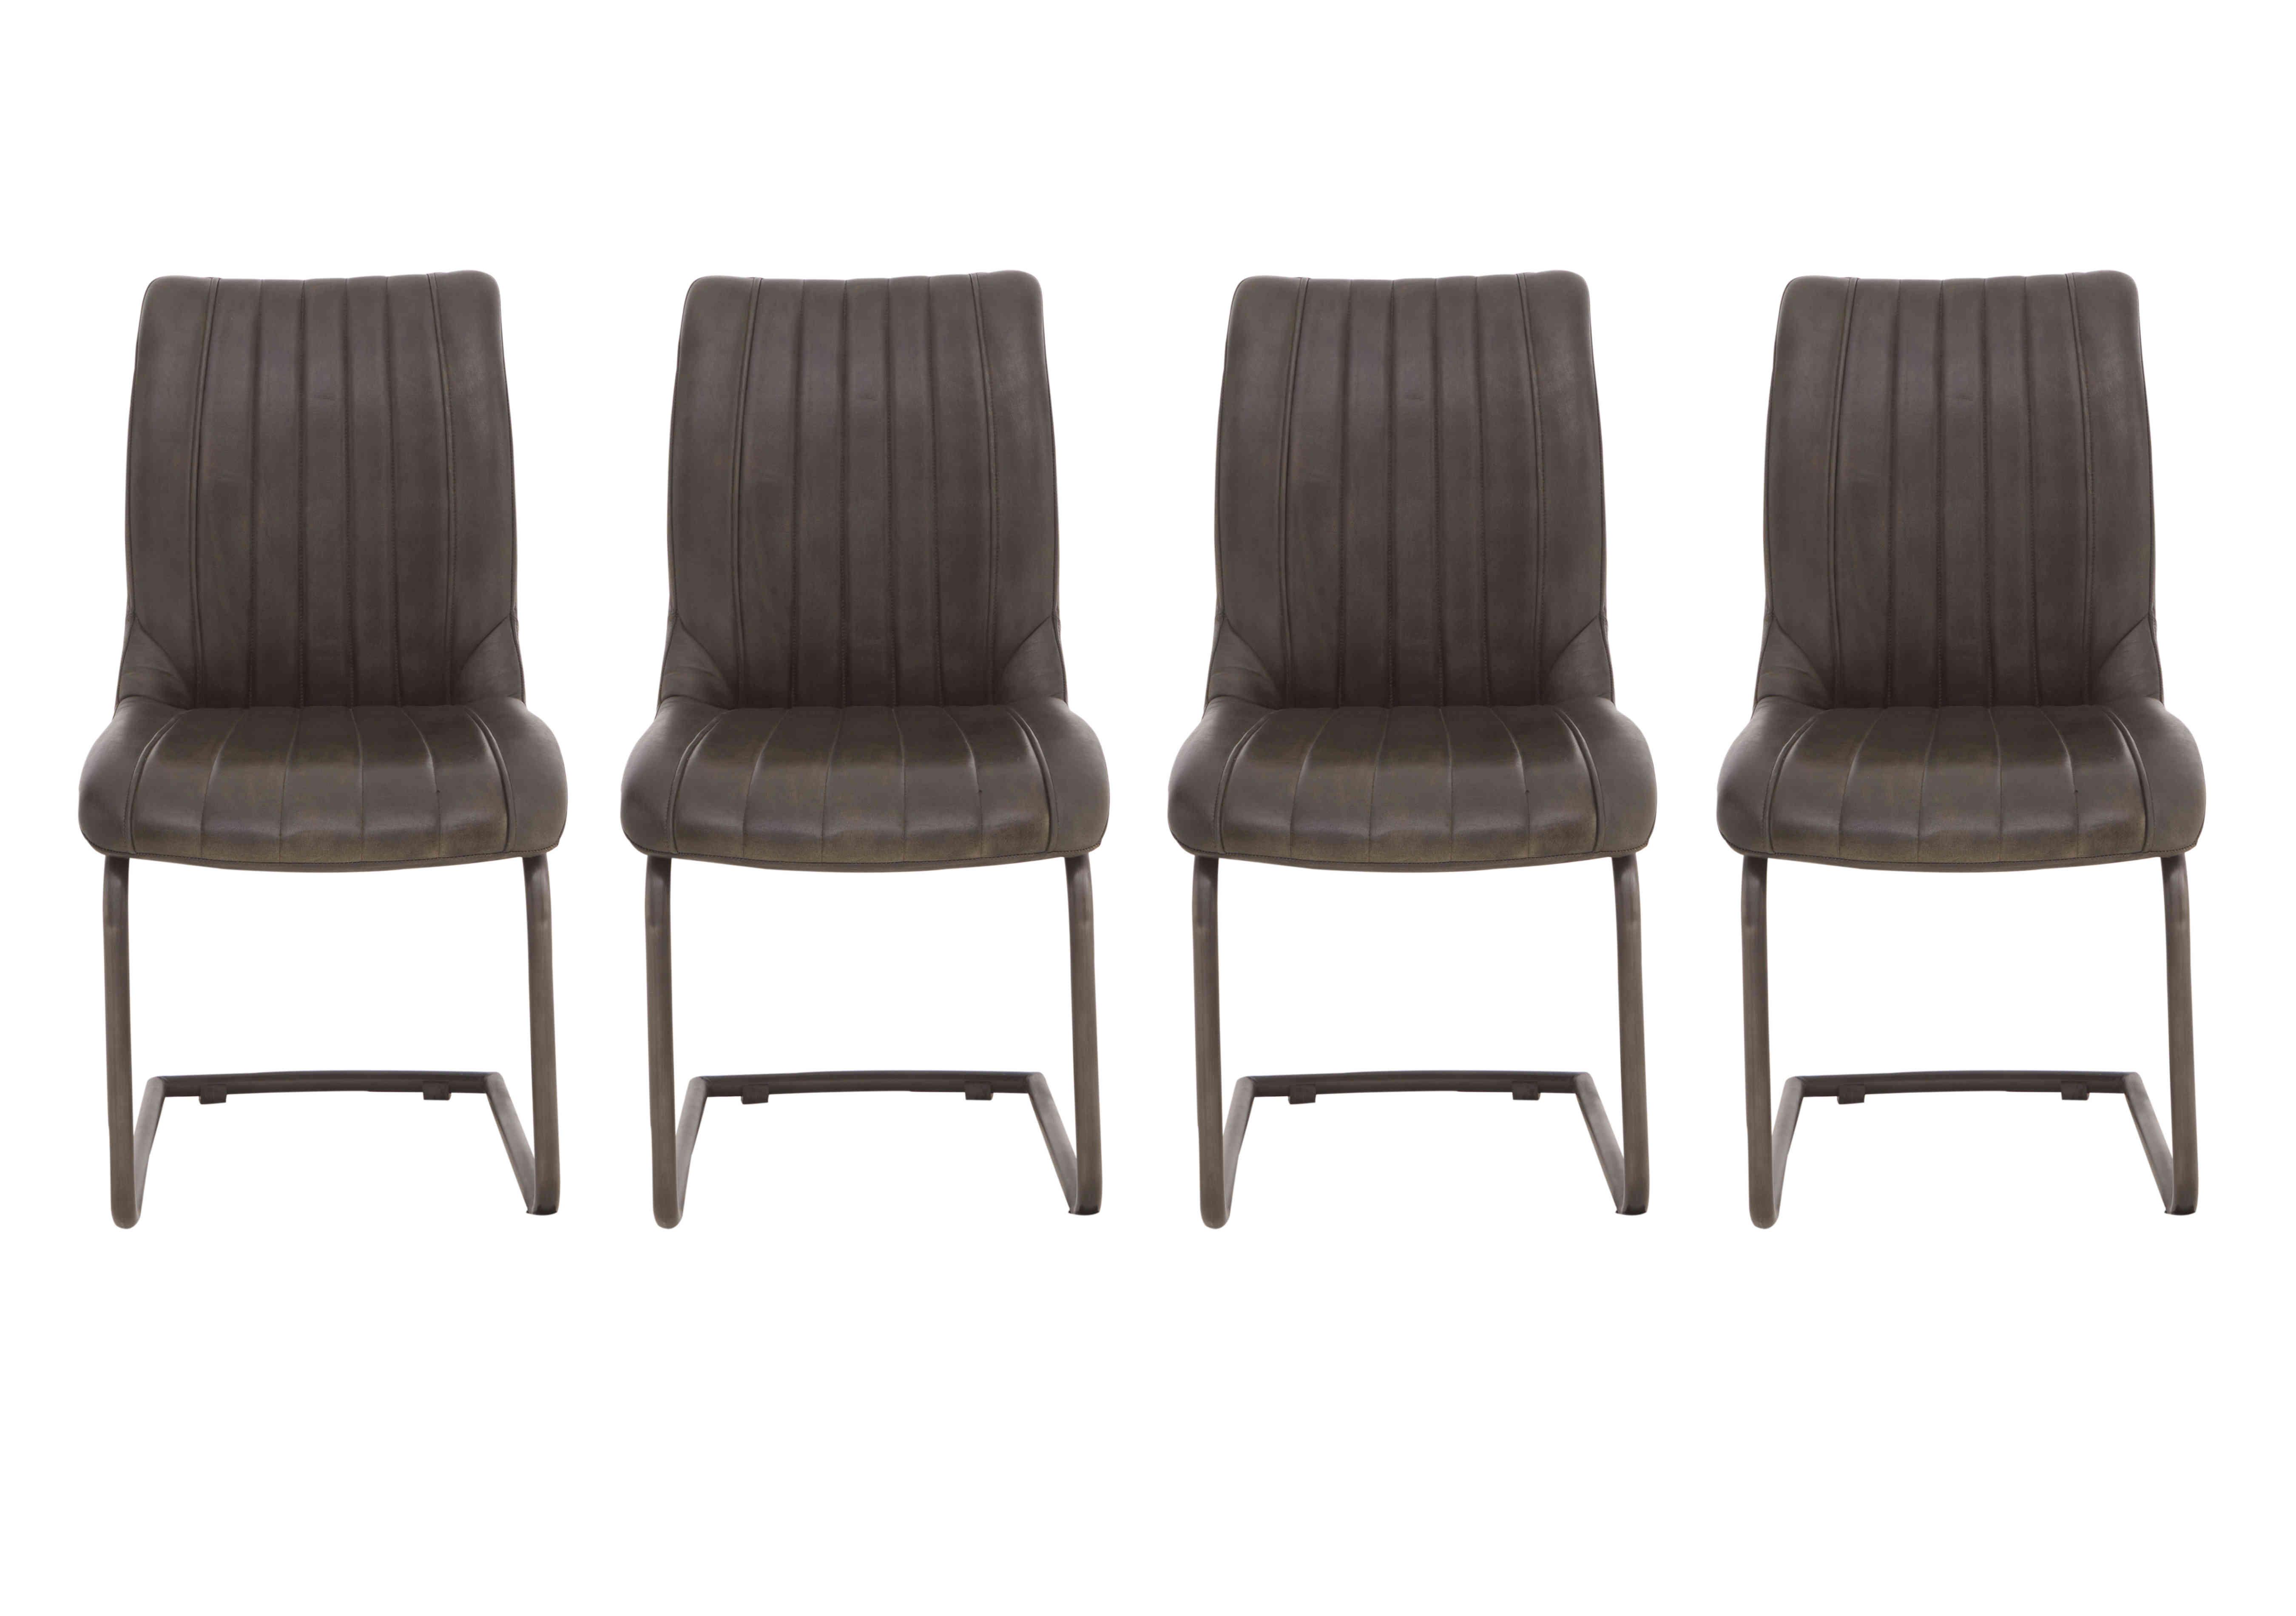 Dee Set of 4 Cantilever Leather Dining Chairs in Vintage Dark Grey on Furniture Village